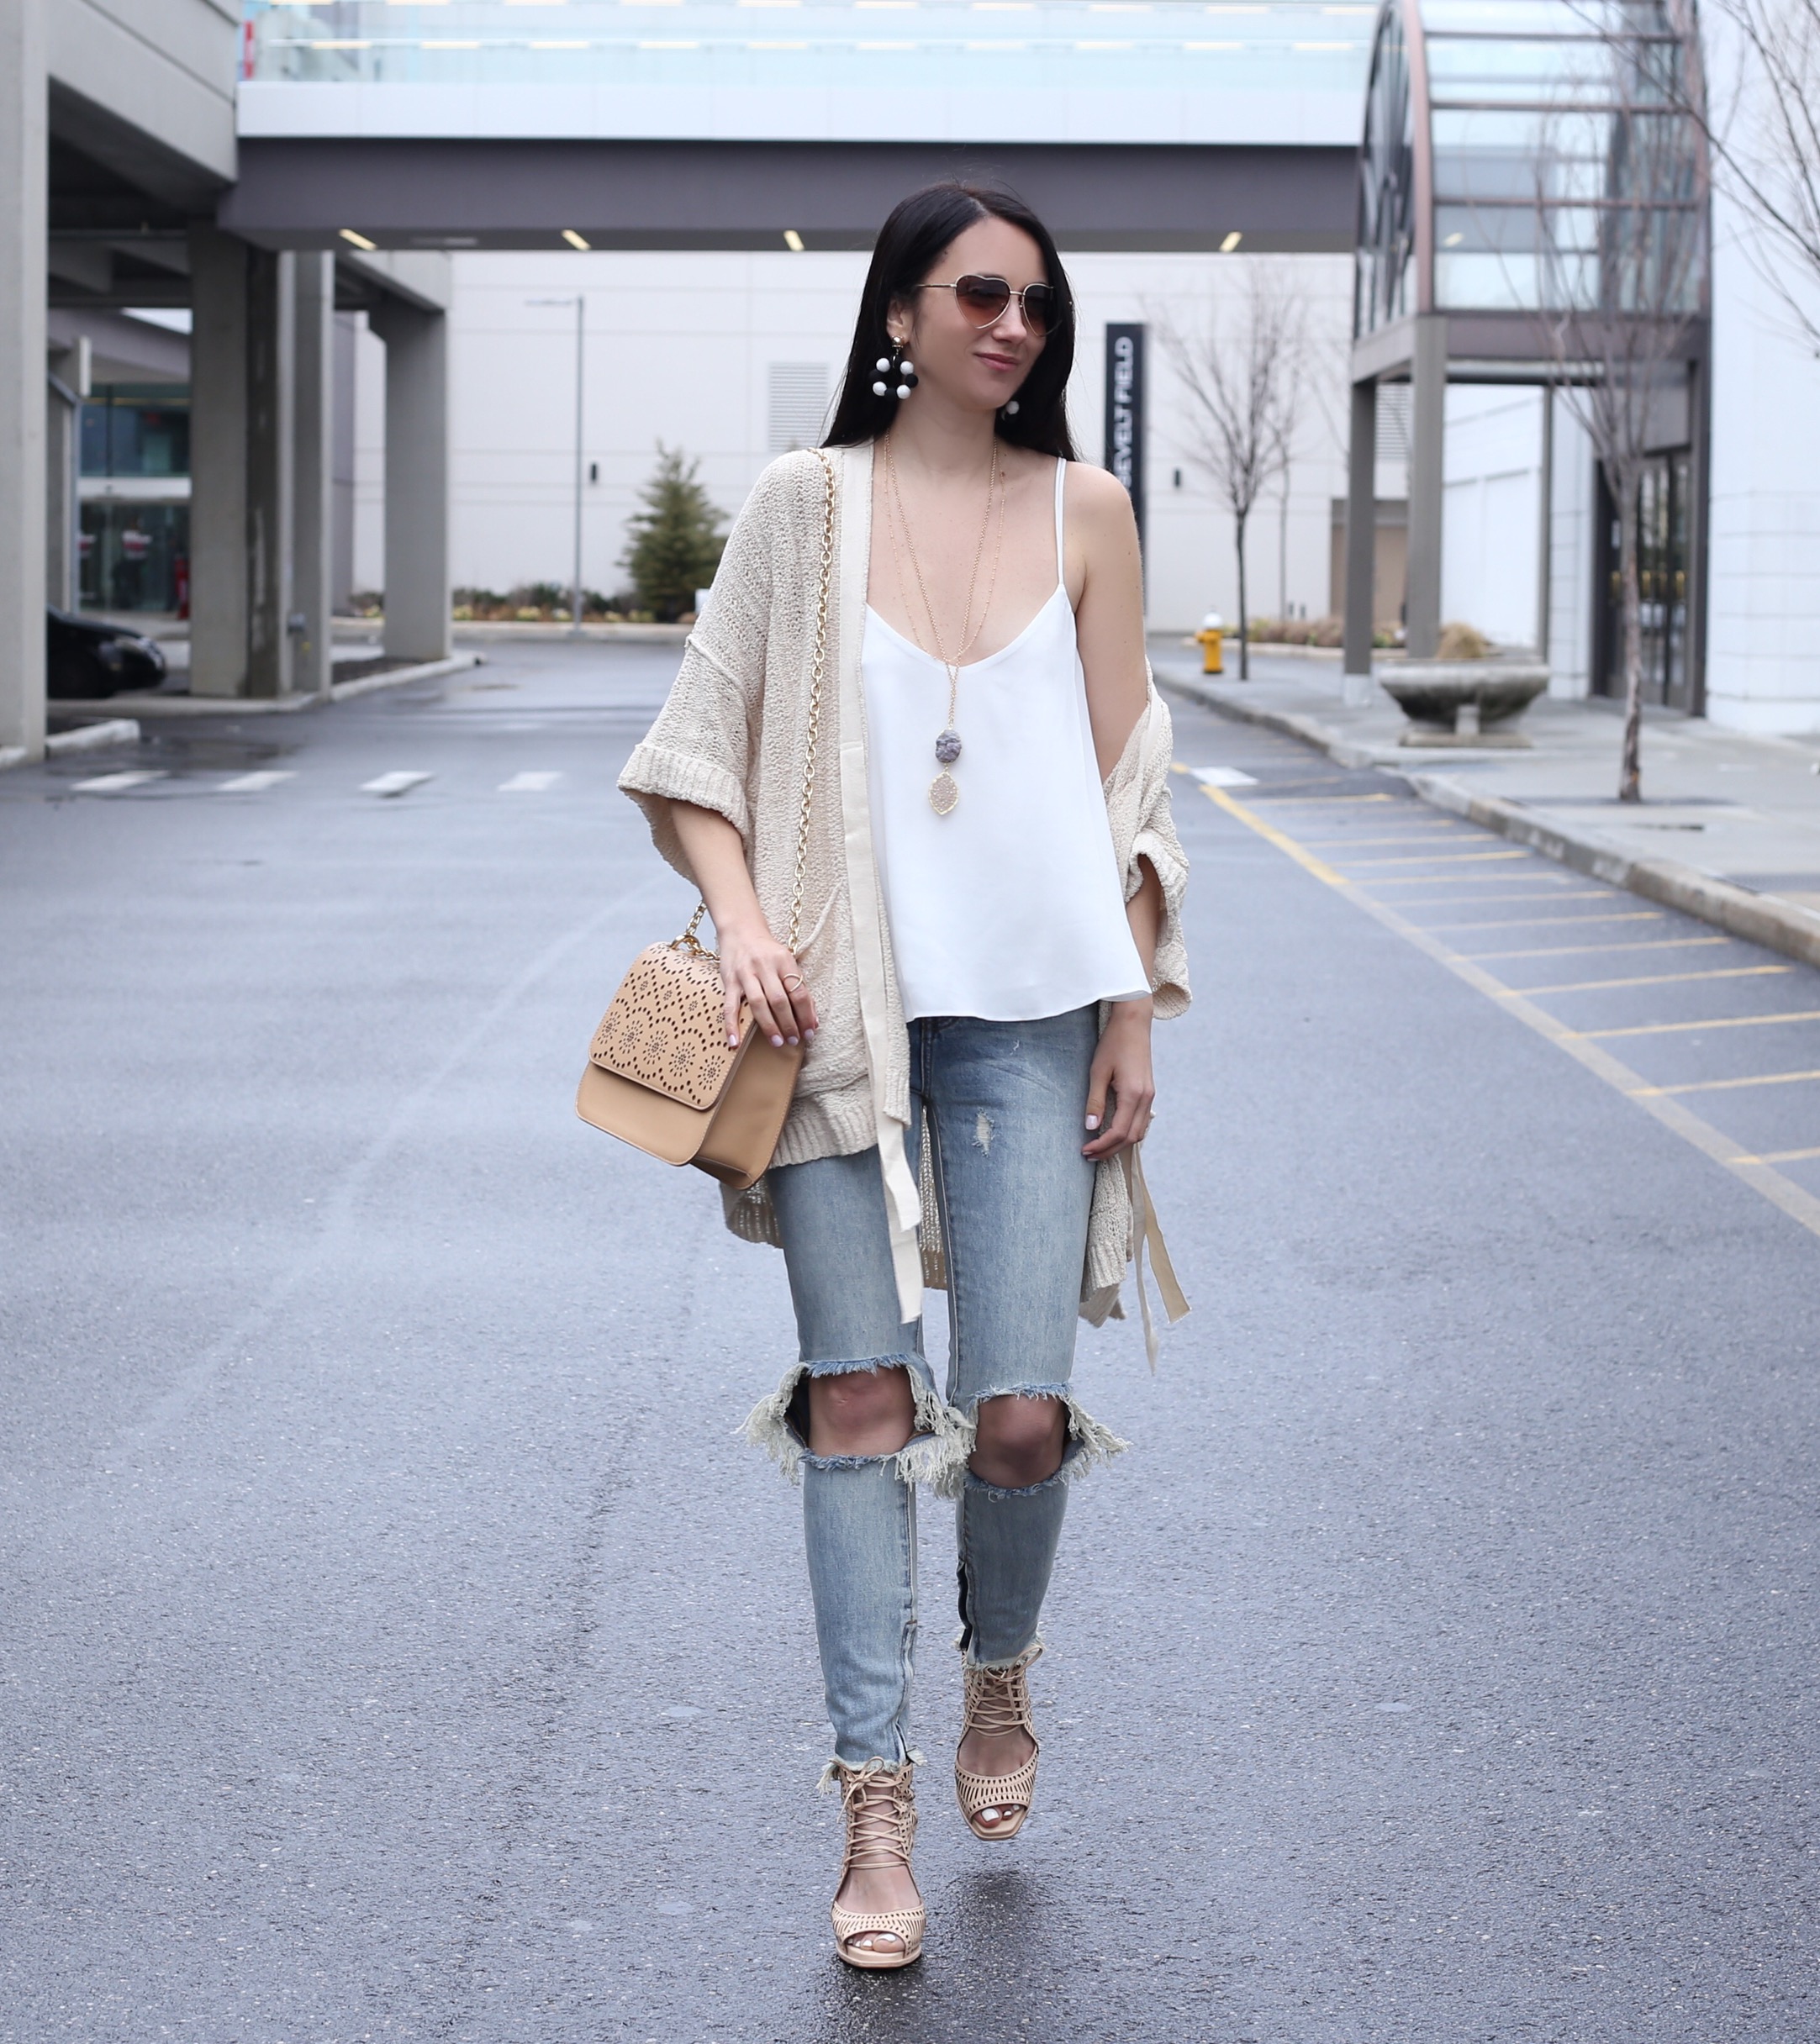 fashion blogger Anna Monteiro of Blushing Rose Style wearing free people beach cardigan and jeffrey campbell wedges